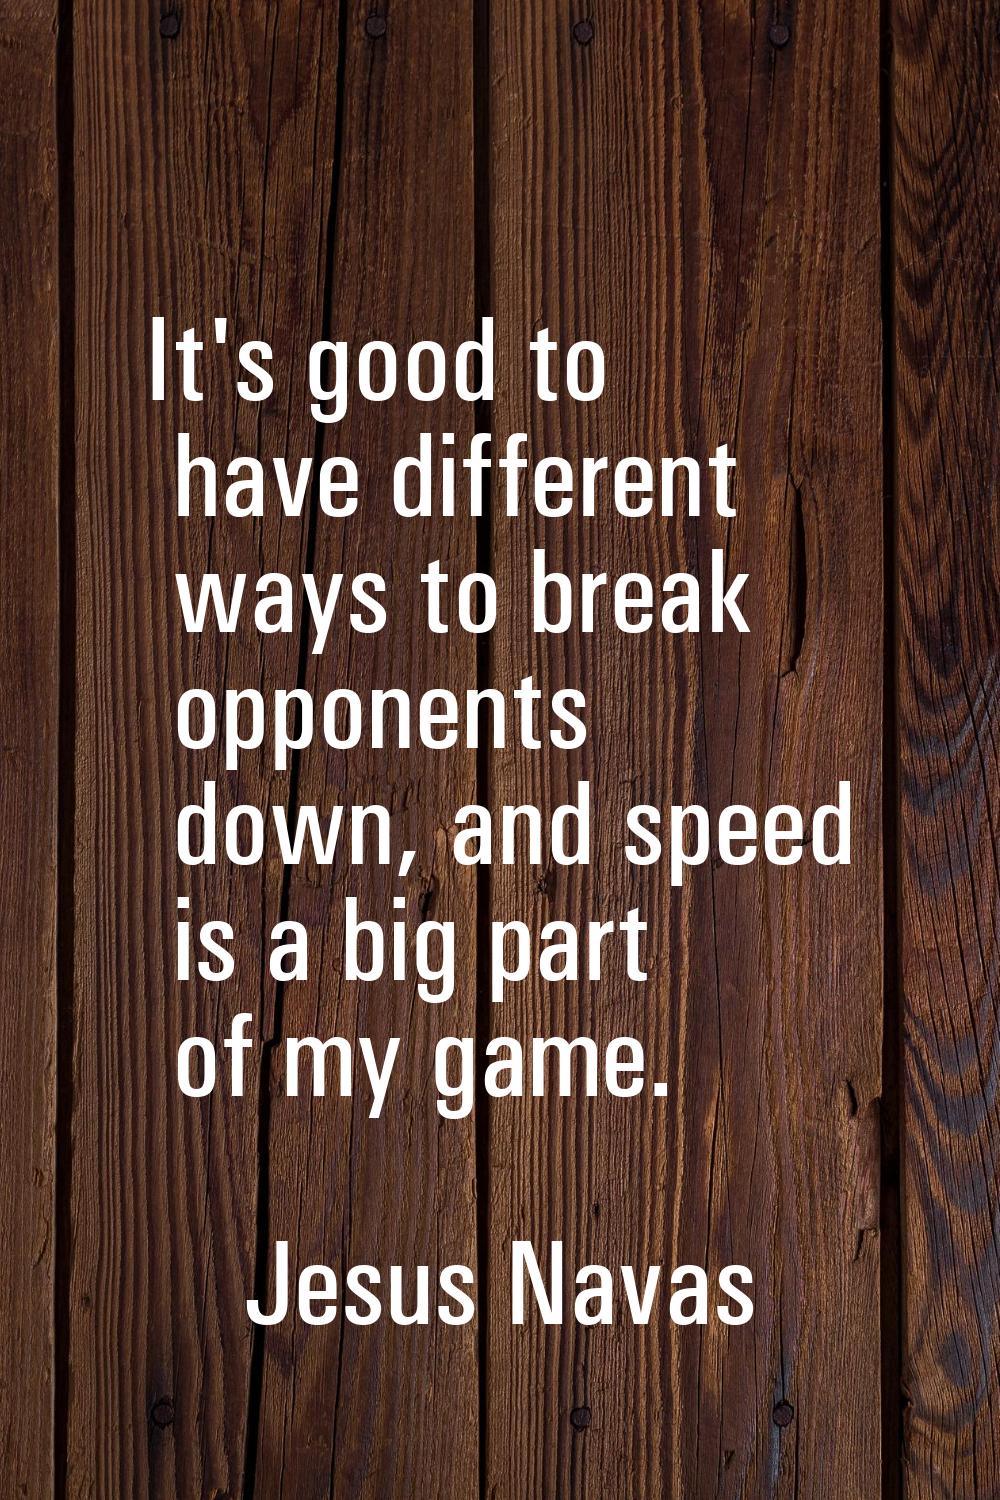 It's good to have different ways to break opponents down, and speed is a big part of my game.